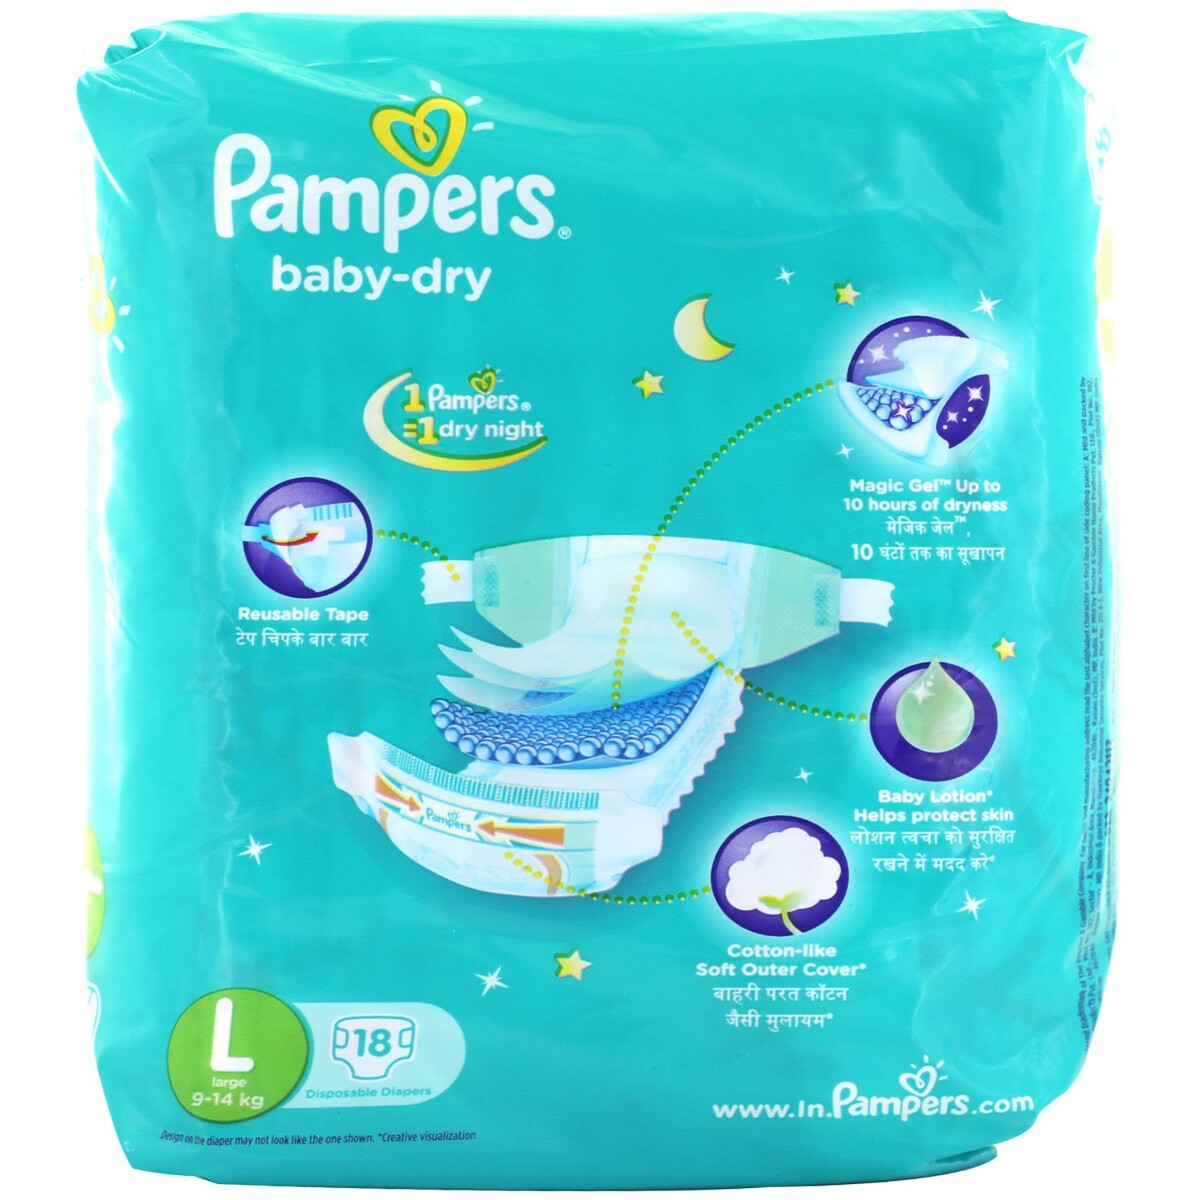 Pampers Diaper Imax Large 18's